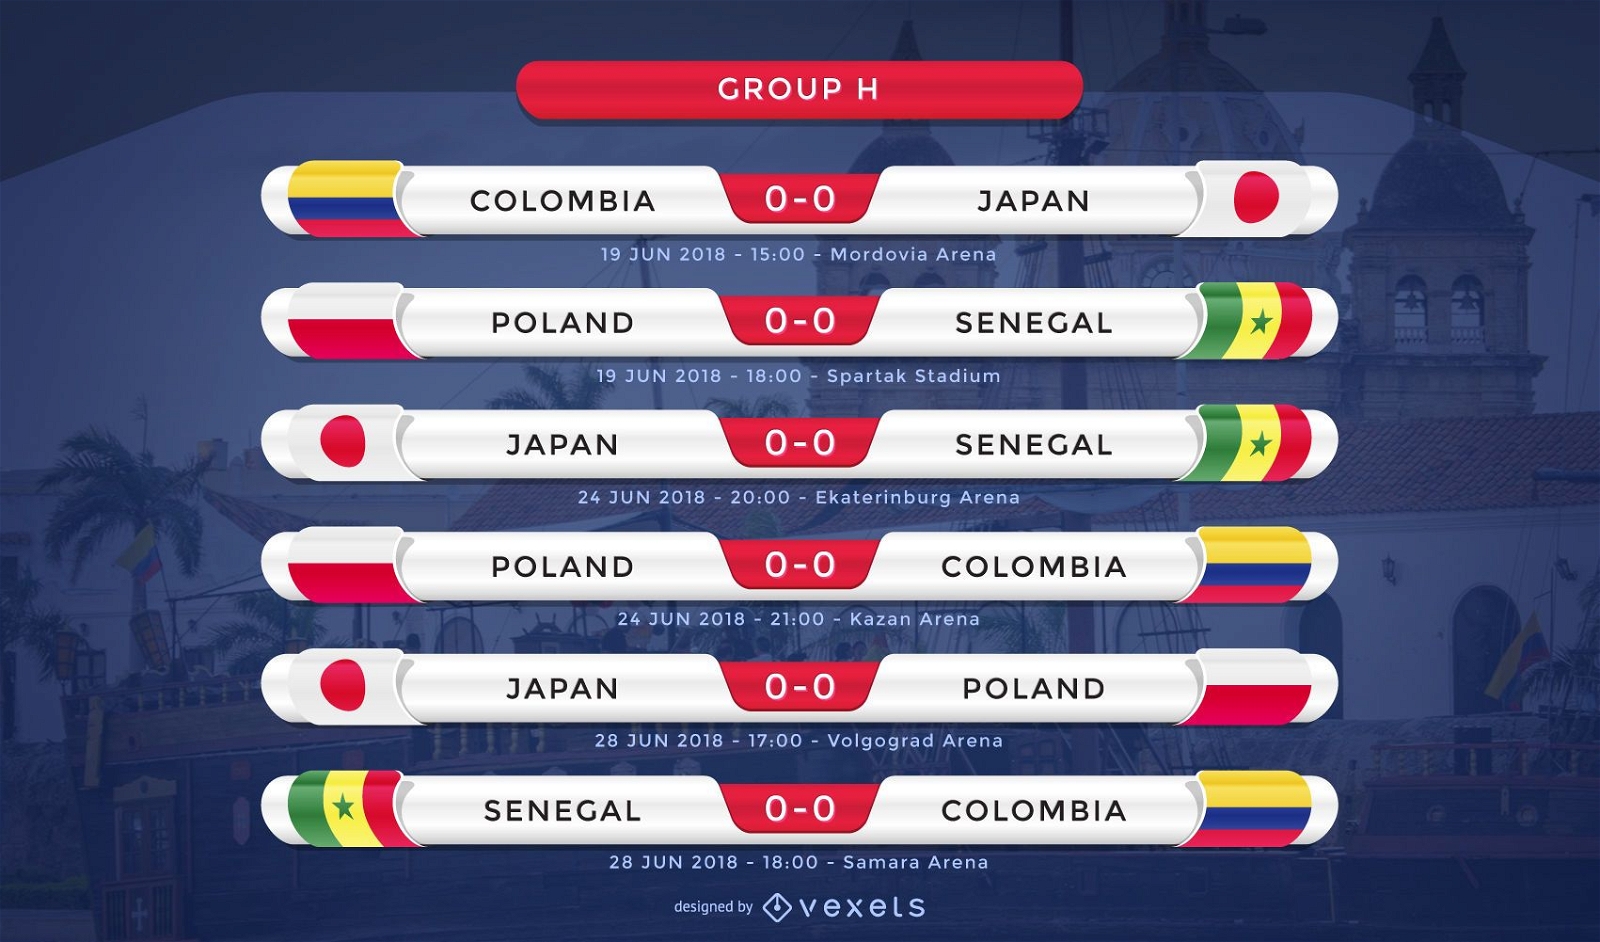 Russia 2018 Group H fixture